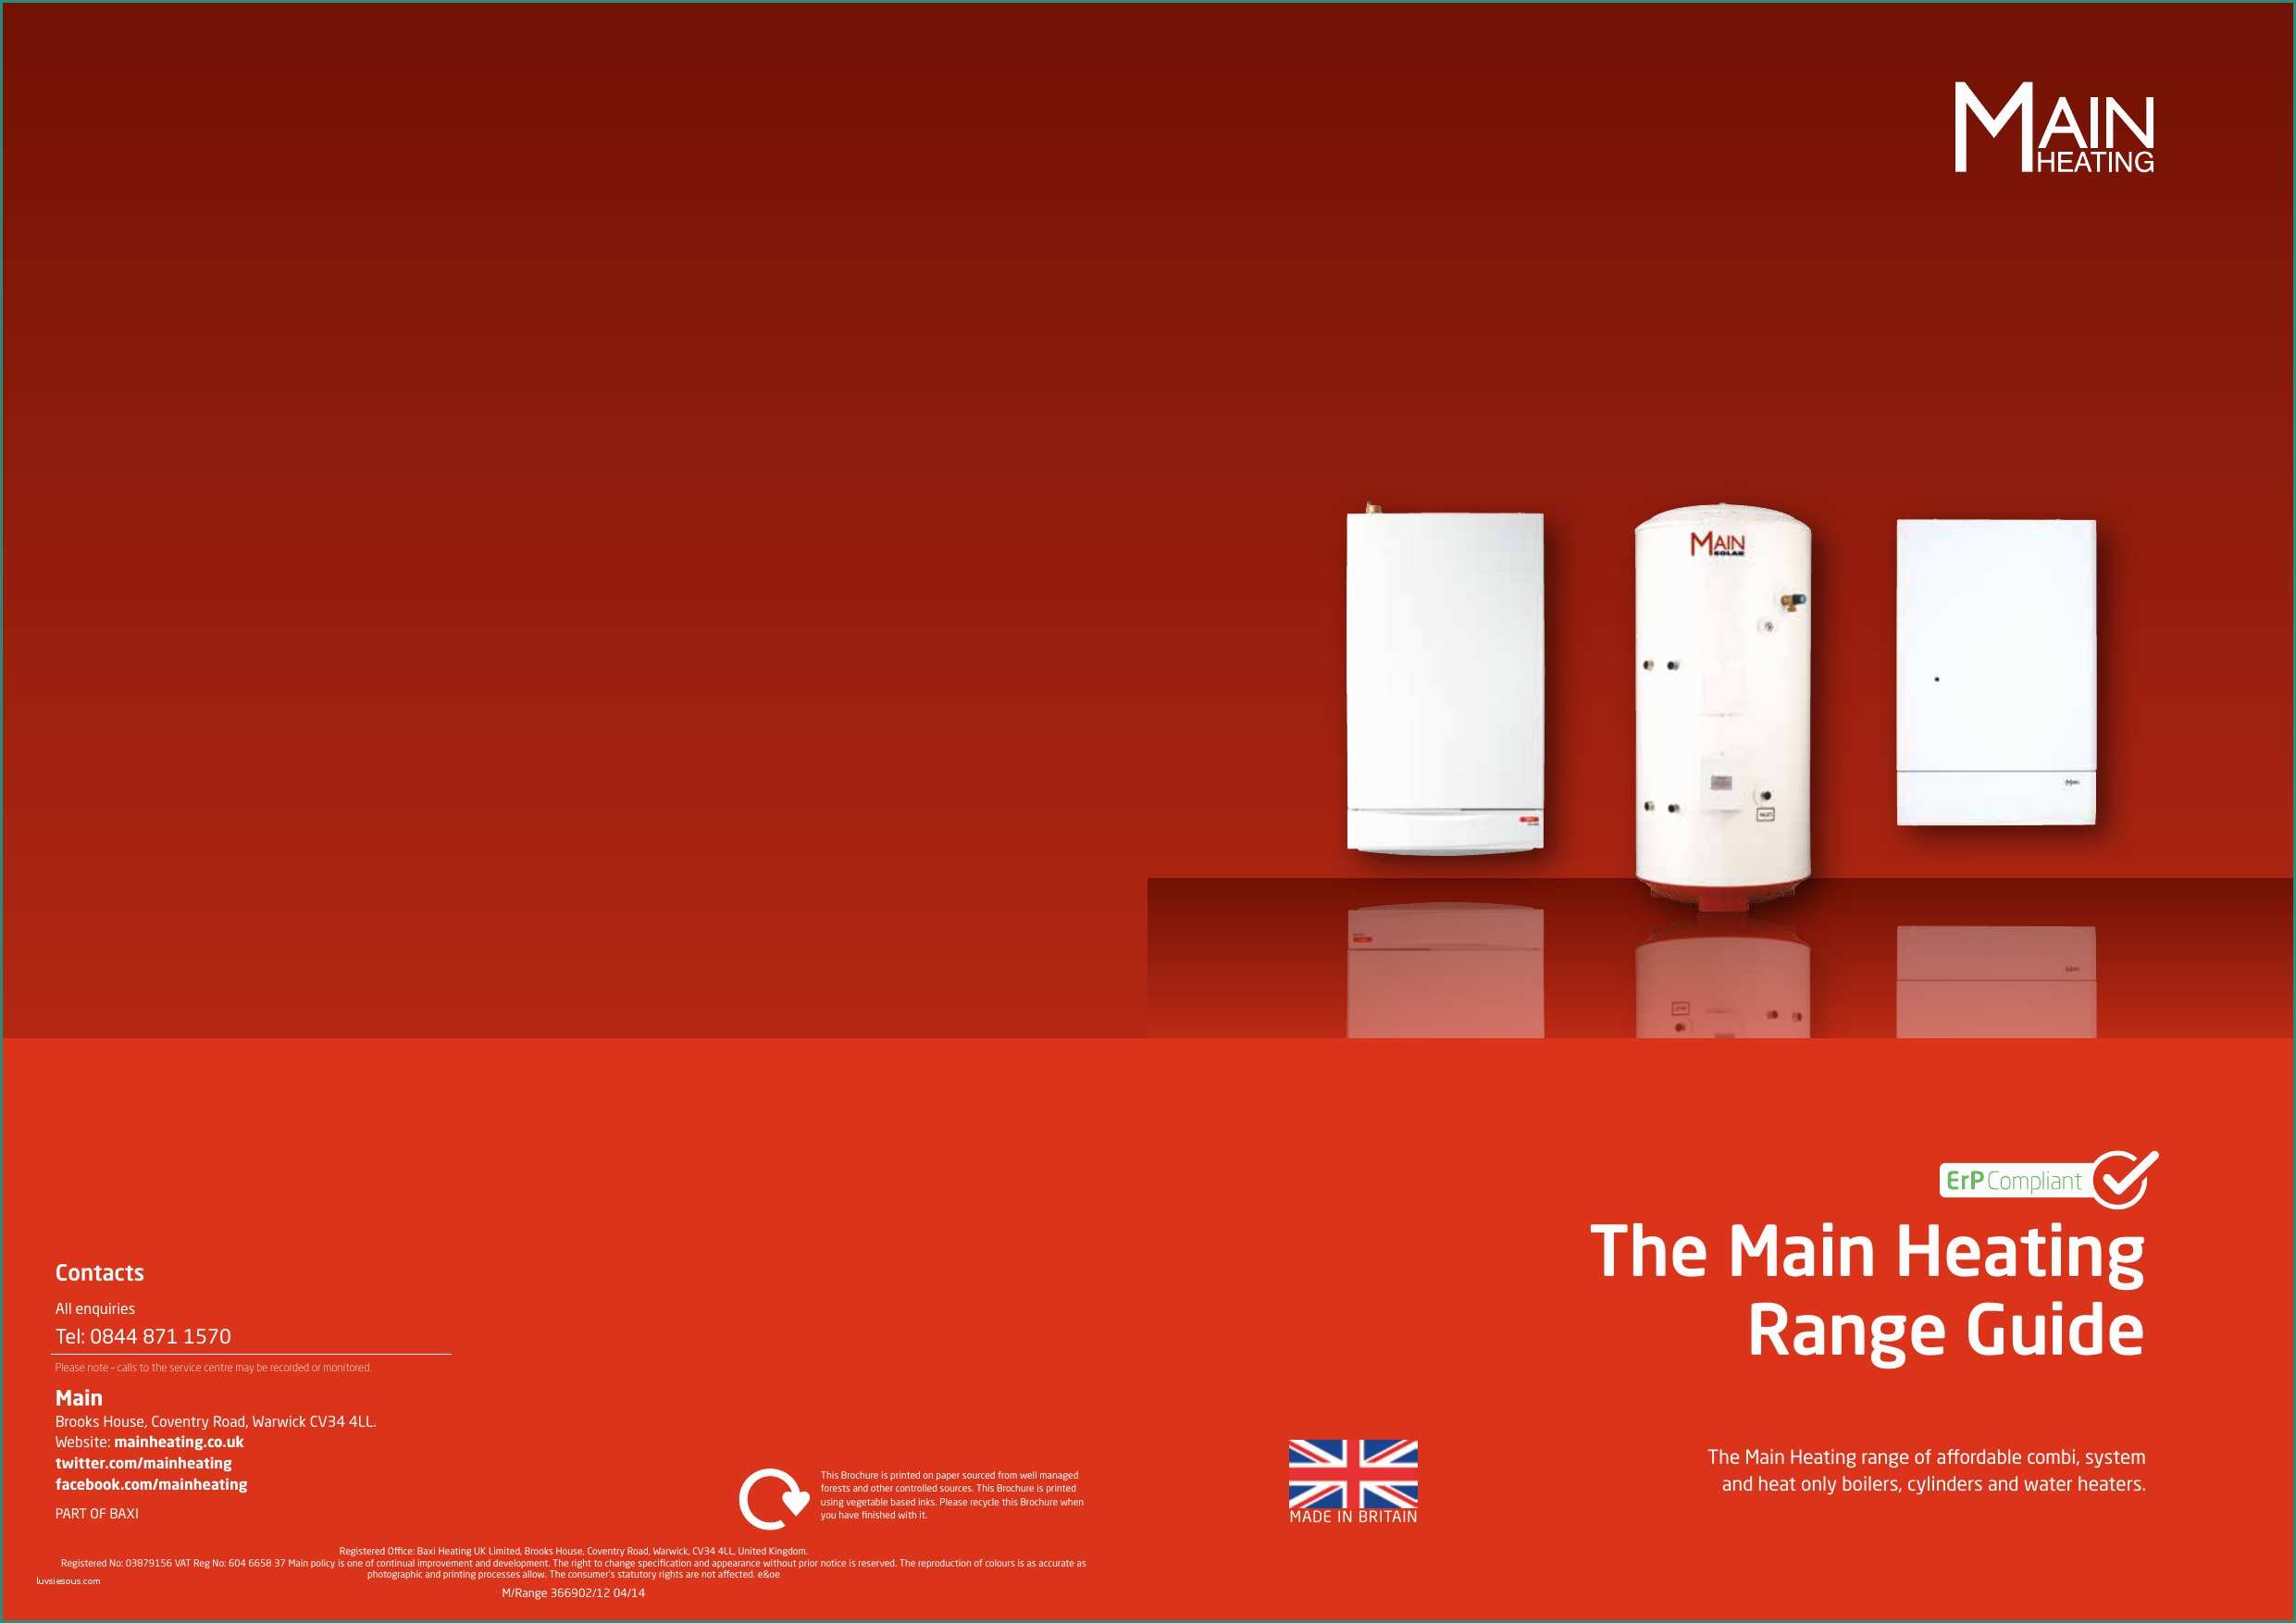 Baxi Eco Compact E the Main Heating Range Guide Discount Central Heating Supplies